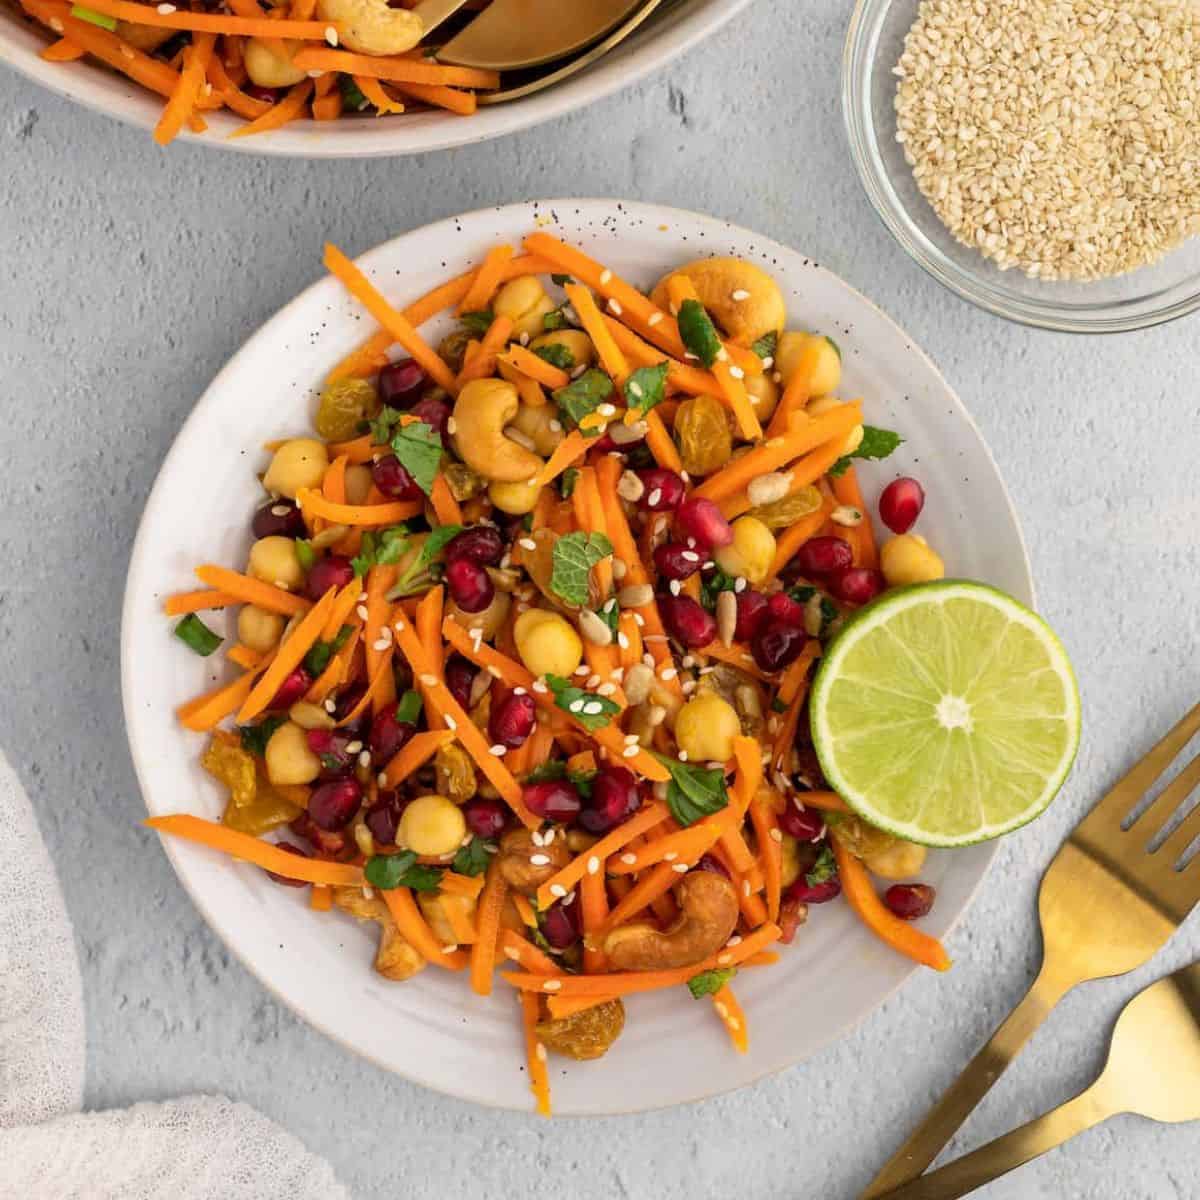 Moroccan Carrot Salad with Citrus-Turmeric Dressing